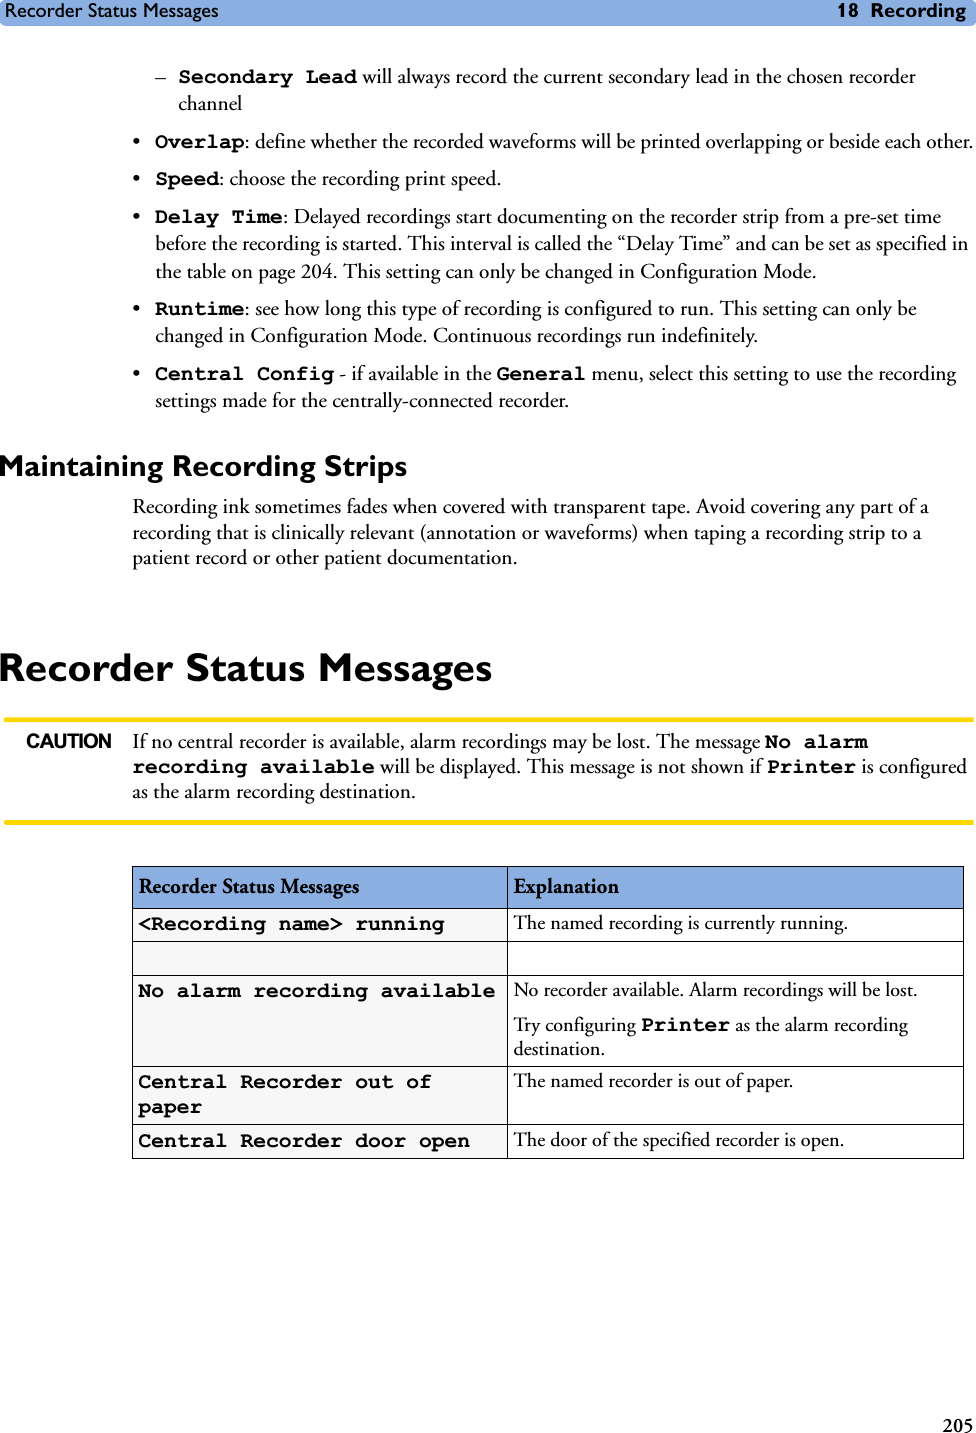 Recorder Status Messages 18 Recording205–Secondary Lead will always record the current secondary lead in the chosen recorder channel•Overlap: define whether the recorded waveforms will be printed overlapping or beside each other.•Speed: choose the recording print speed.•Delay Time: Delayed recordings start documenting on the recorder strip from a pre-set time before the recording is started. This interval is called the “Delay Time” and can be set as specified in the table on page 204. This setting can only be changed in Configuration Mode.•Runtime: see how long this type of recording is configured to run. This setting can only be changed in Configuration Mode. Continuous recordings run indefinitely.•Central Config - if available in the General menu, select this setting to use the recording settings made for the centrally-connected recorder.Maintaining Recording StripsRecording ink sometimes fades when covered with transparent tape. Avoid covering any part of a recording that is clinically relevant (annotation or waveforms) when taping a recording strip to a patient record or other patient documentation. Recorder Status MessagesCAUTION If no central recorder is available, alarm recordings may be lost. The message No alarm recording available will be displayed. This message is not shown if Printer is configured as the alarm recording destination.Recorder Status Messages Explanation&lt;Recording name&gt; running The named recording is currently running. No alarm recording available No recorder available. Alarm recordings will be lost. Try configuring Printer as the alarm recording destination.Central Recorder out of paperThe named recorder is out of paper.Central Recorder door open The door of the specified recorder is open.